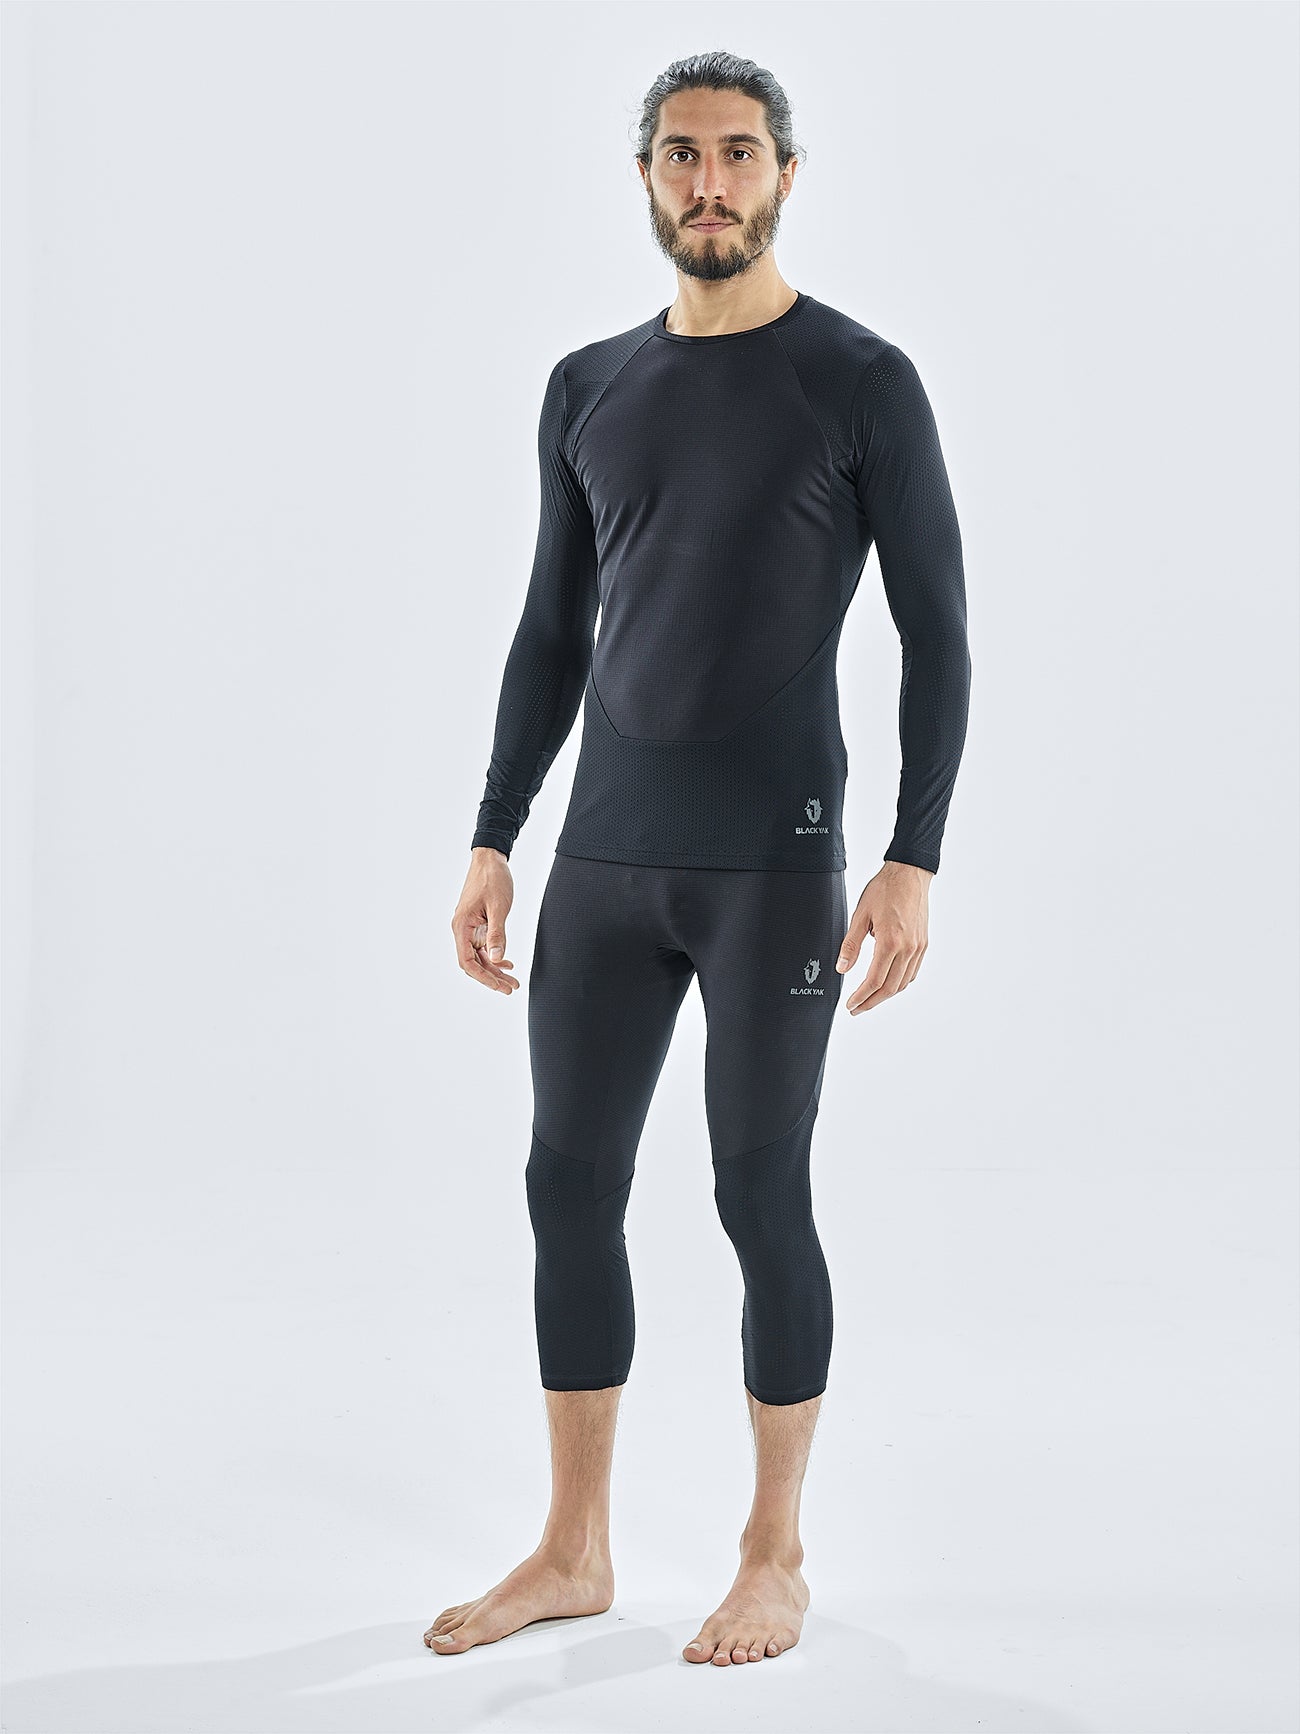 Nike Factory Store 3/4 Length Football Compression & Baselayer.